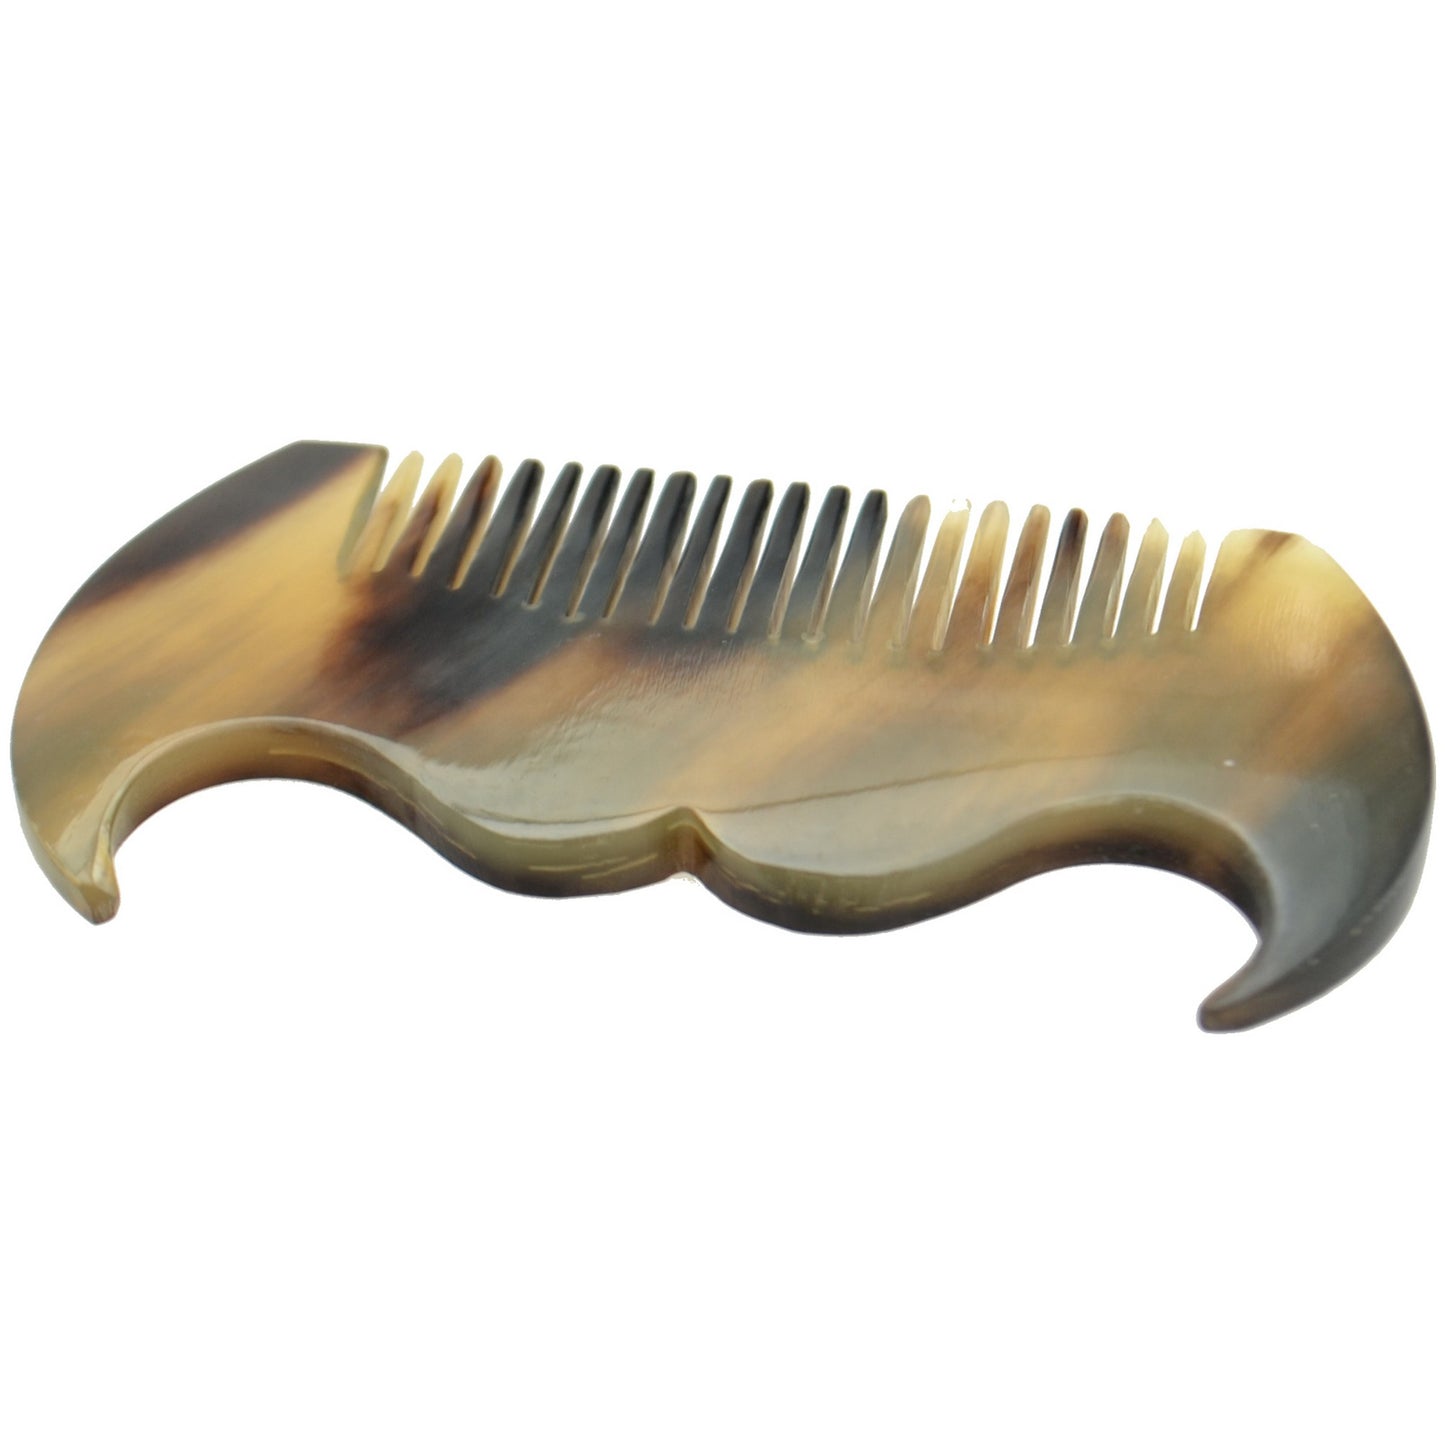 Real Horn Moustache Comb in Presentation Box - 7cm Long